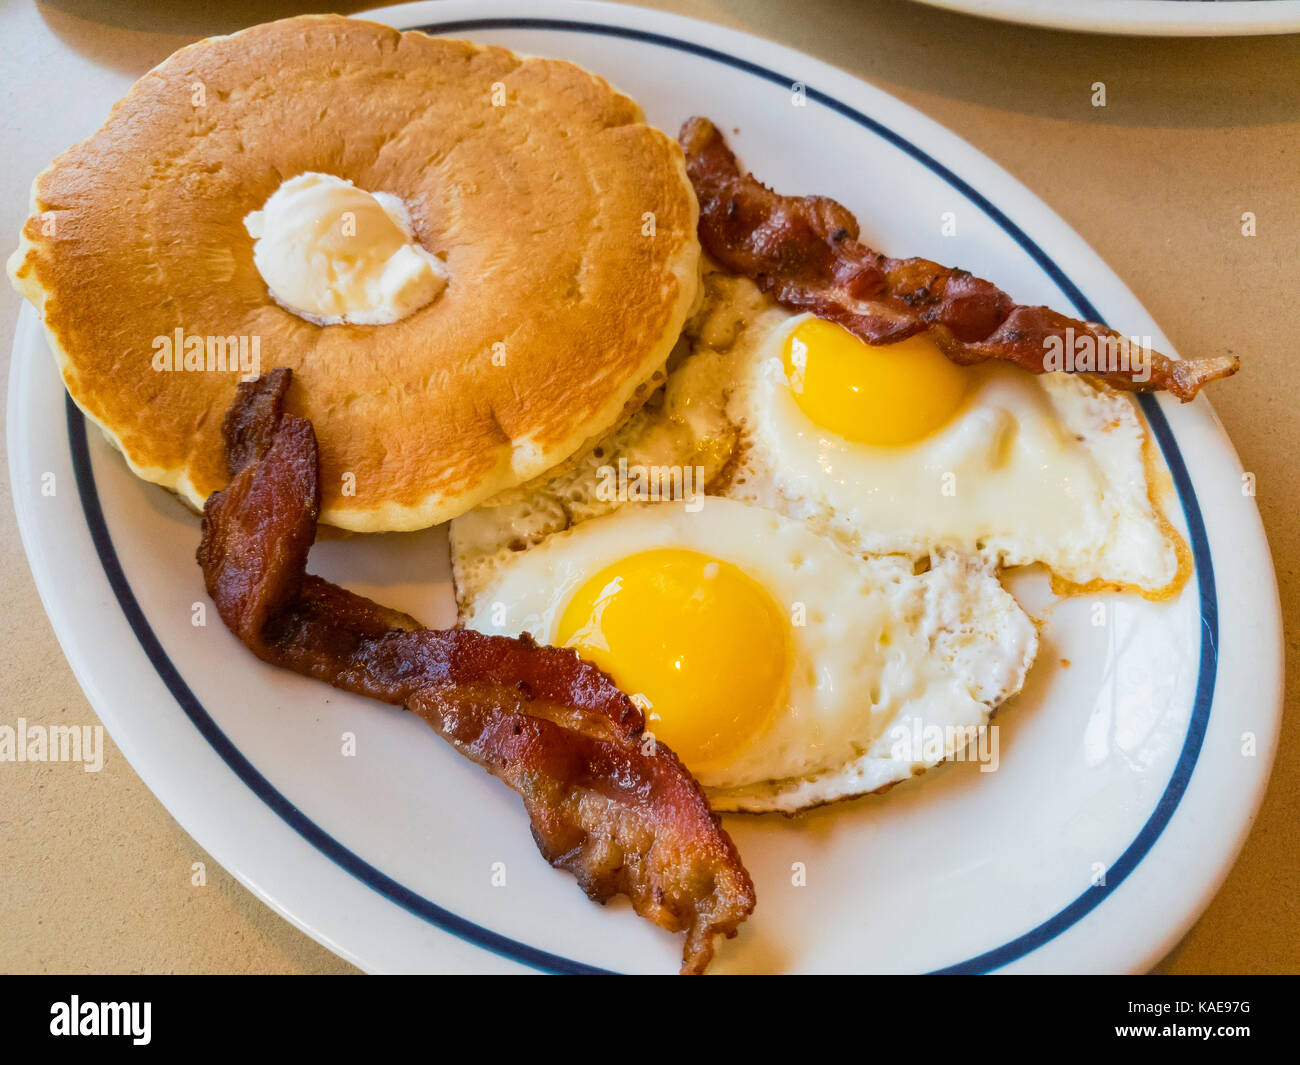 Close up shoot of traidional american breakfast of pancake with eggs and bacon, photo taken at a chain restaurant, Los Angeles, California, United Sta Stock Photo